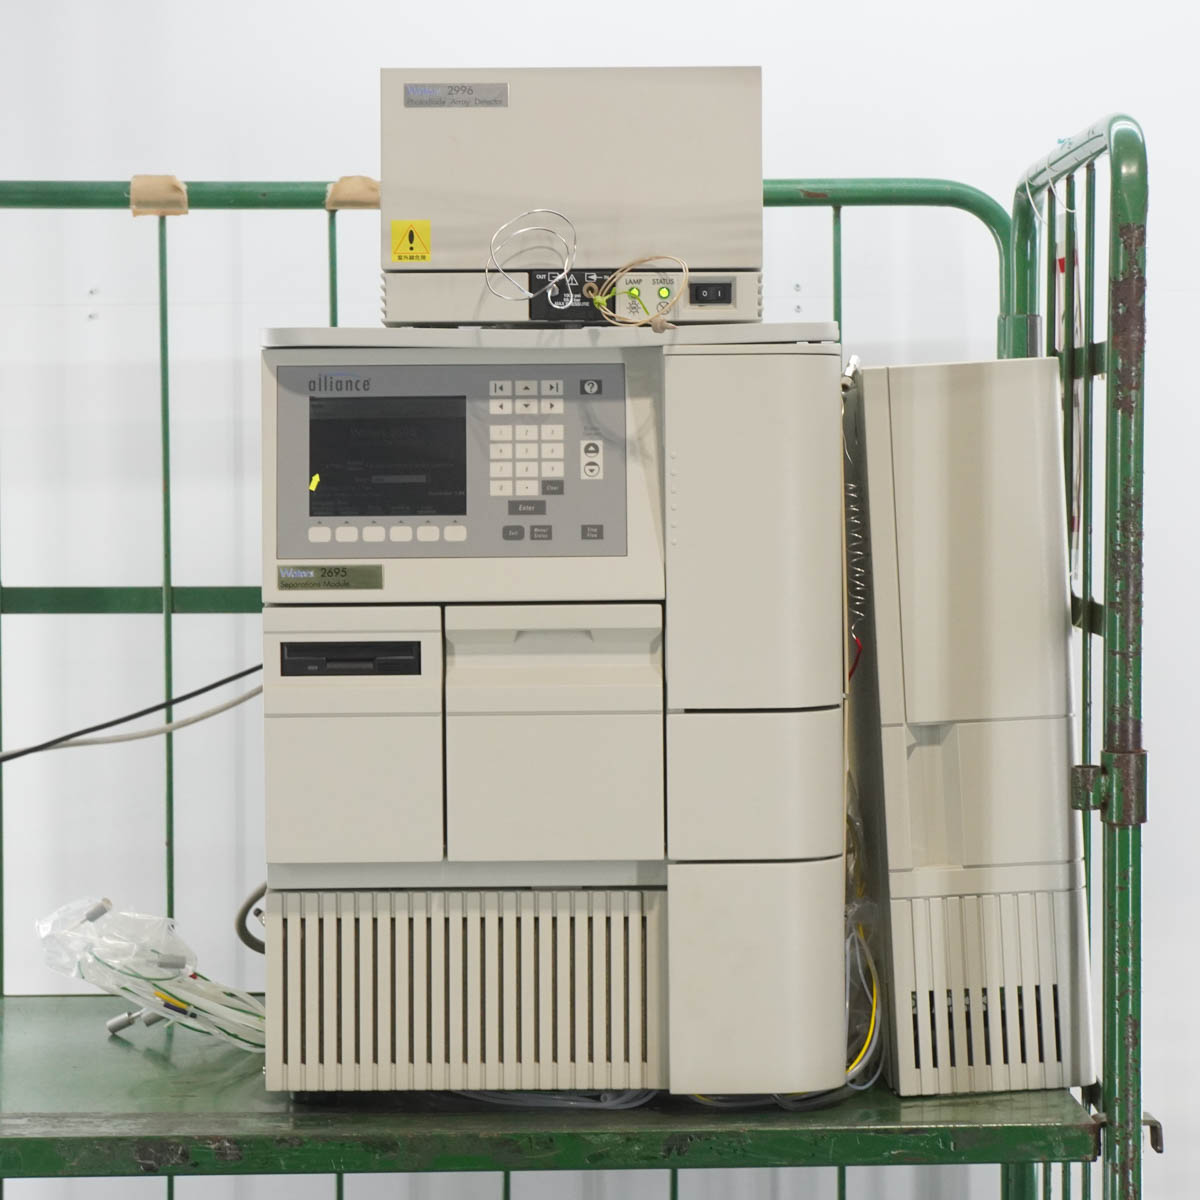 [DW]USED 8日保証 セット Waters 2695 2414 2487 SHC alliance hplc Separations Module...[ST02938-0017] - 1